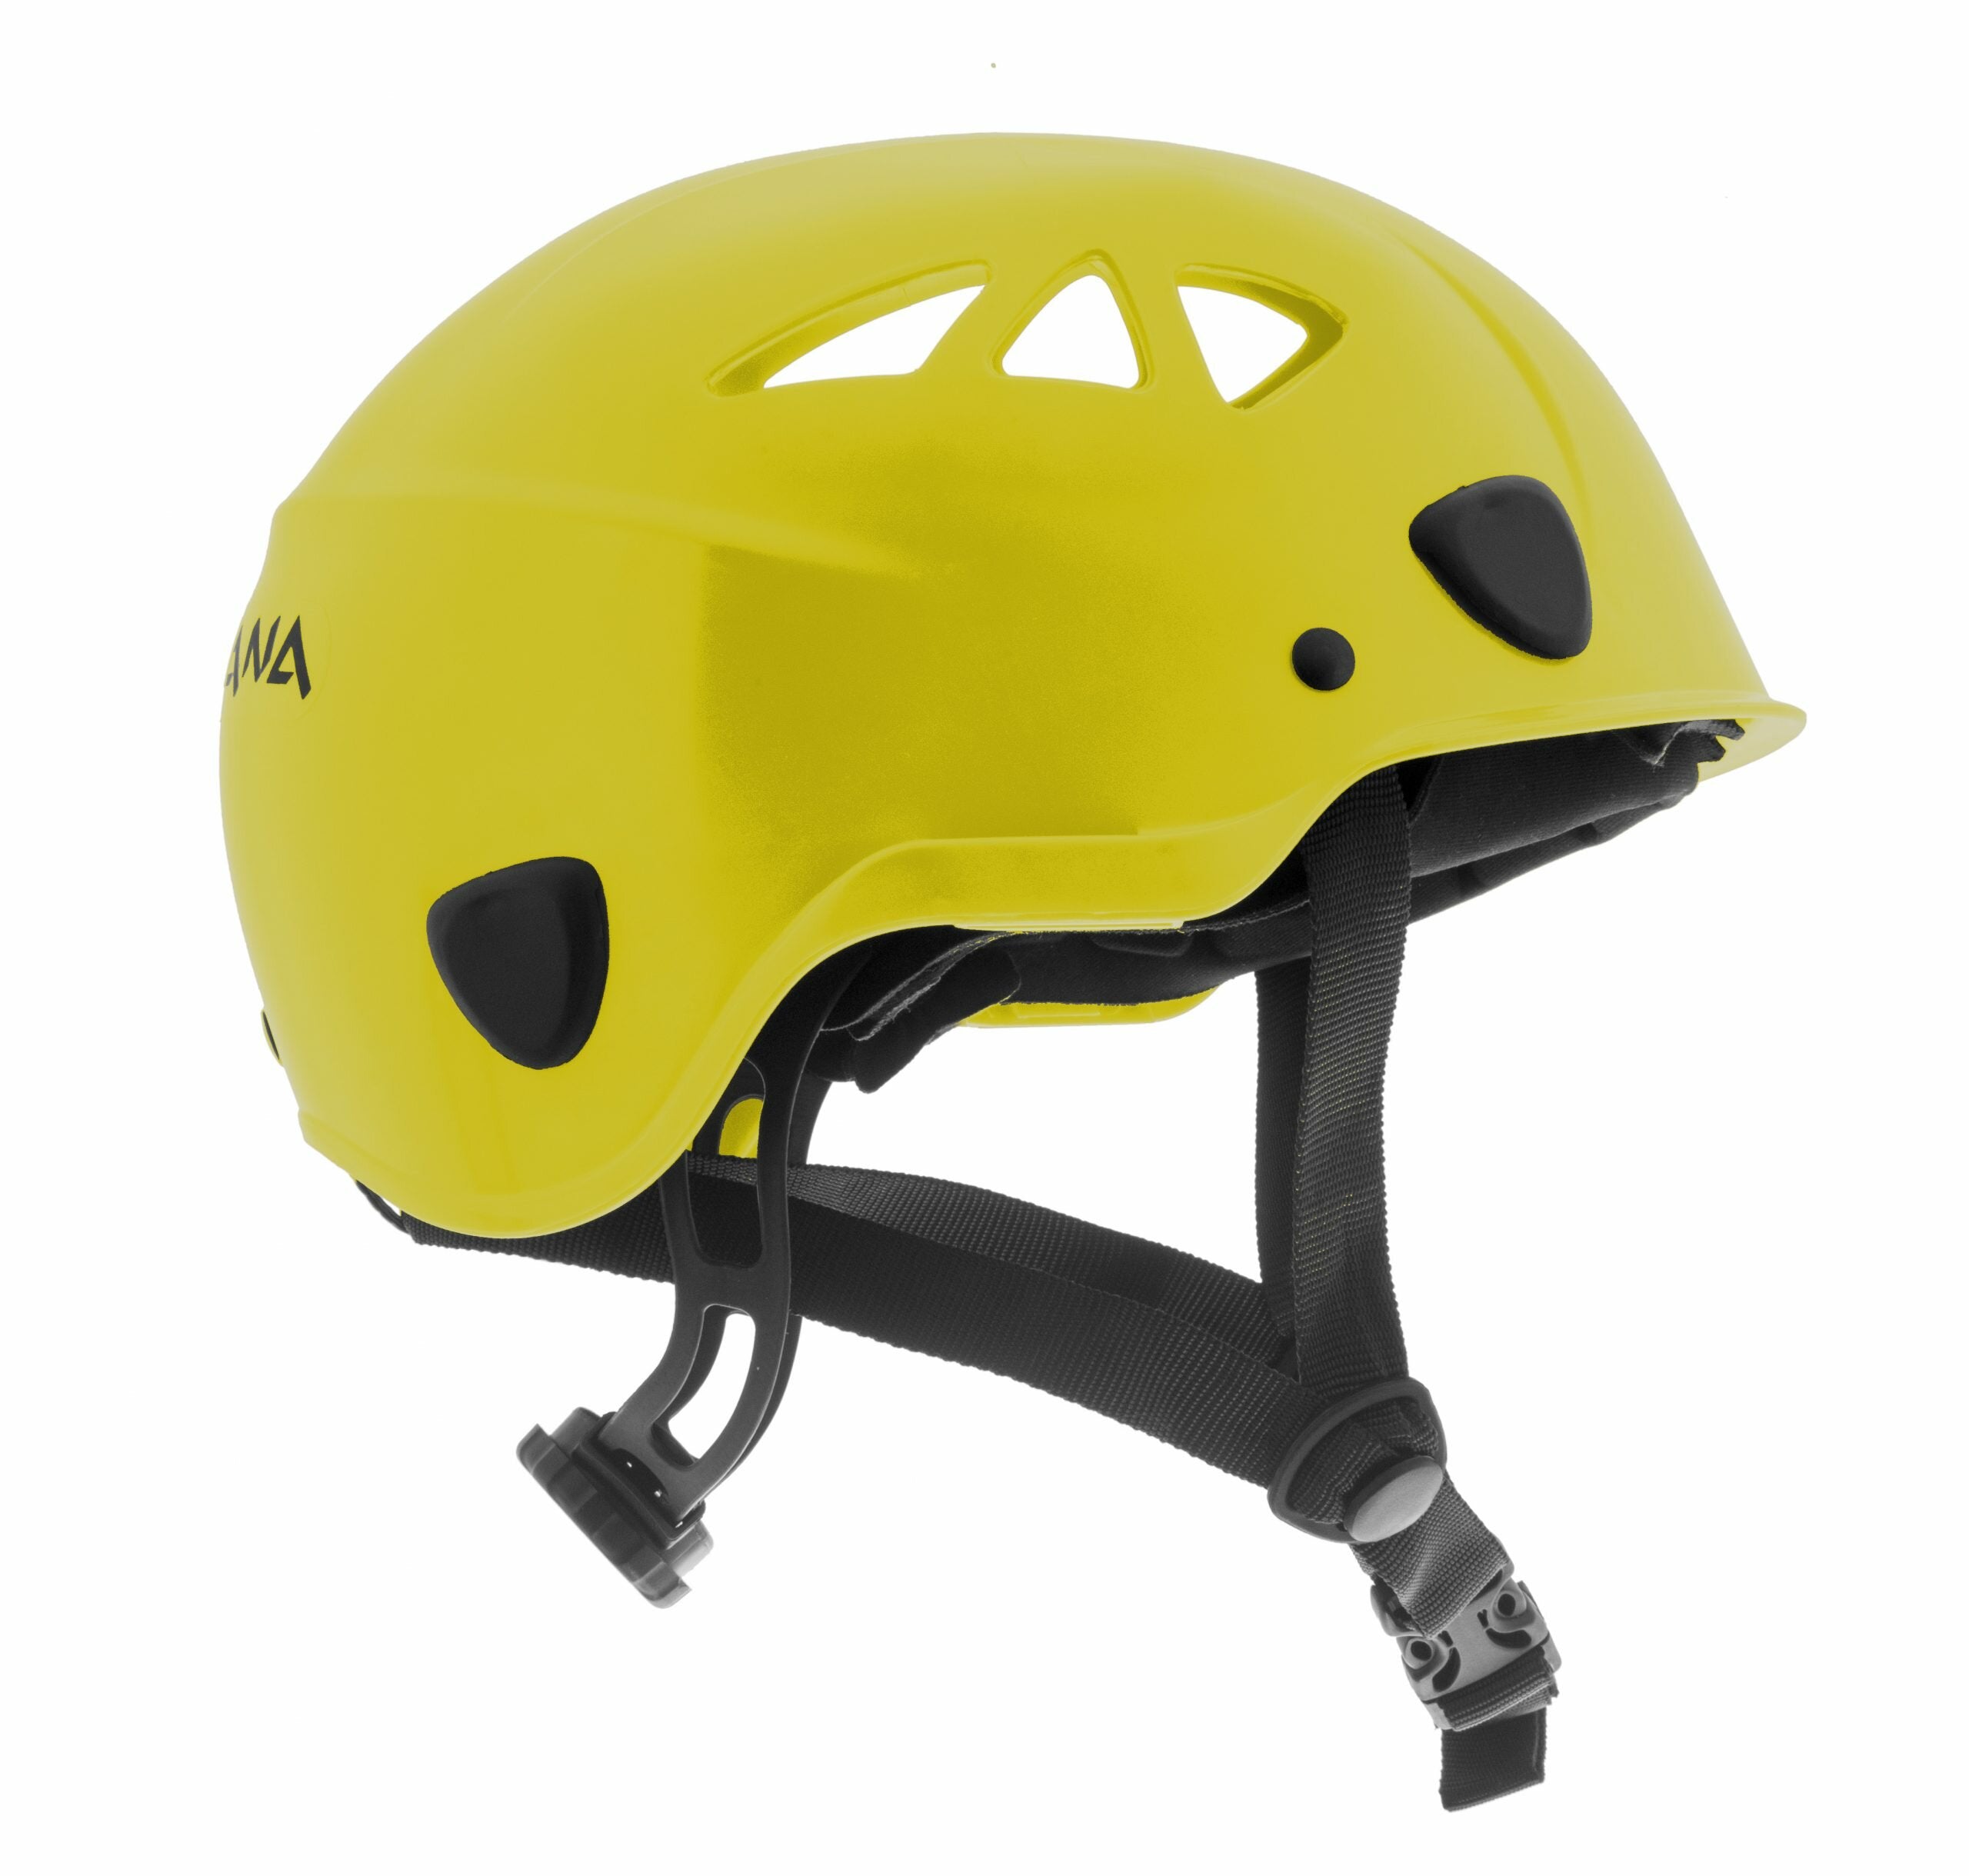 CAPACETE ARES CLASSE A - TIPO III CA 32260  MONTANA